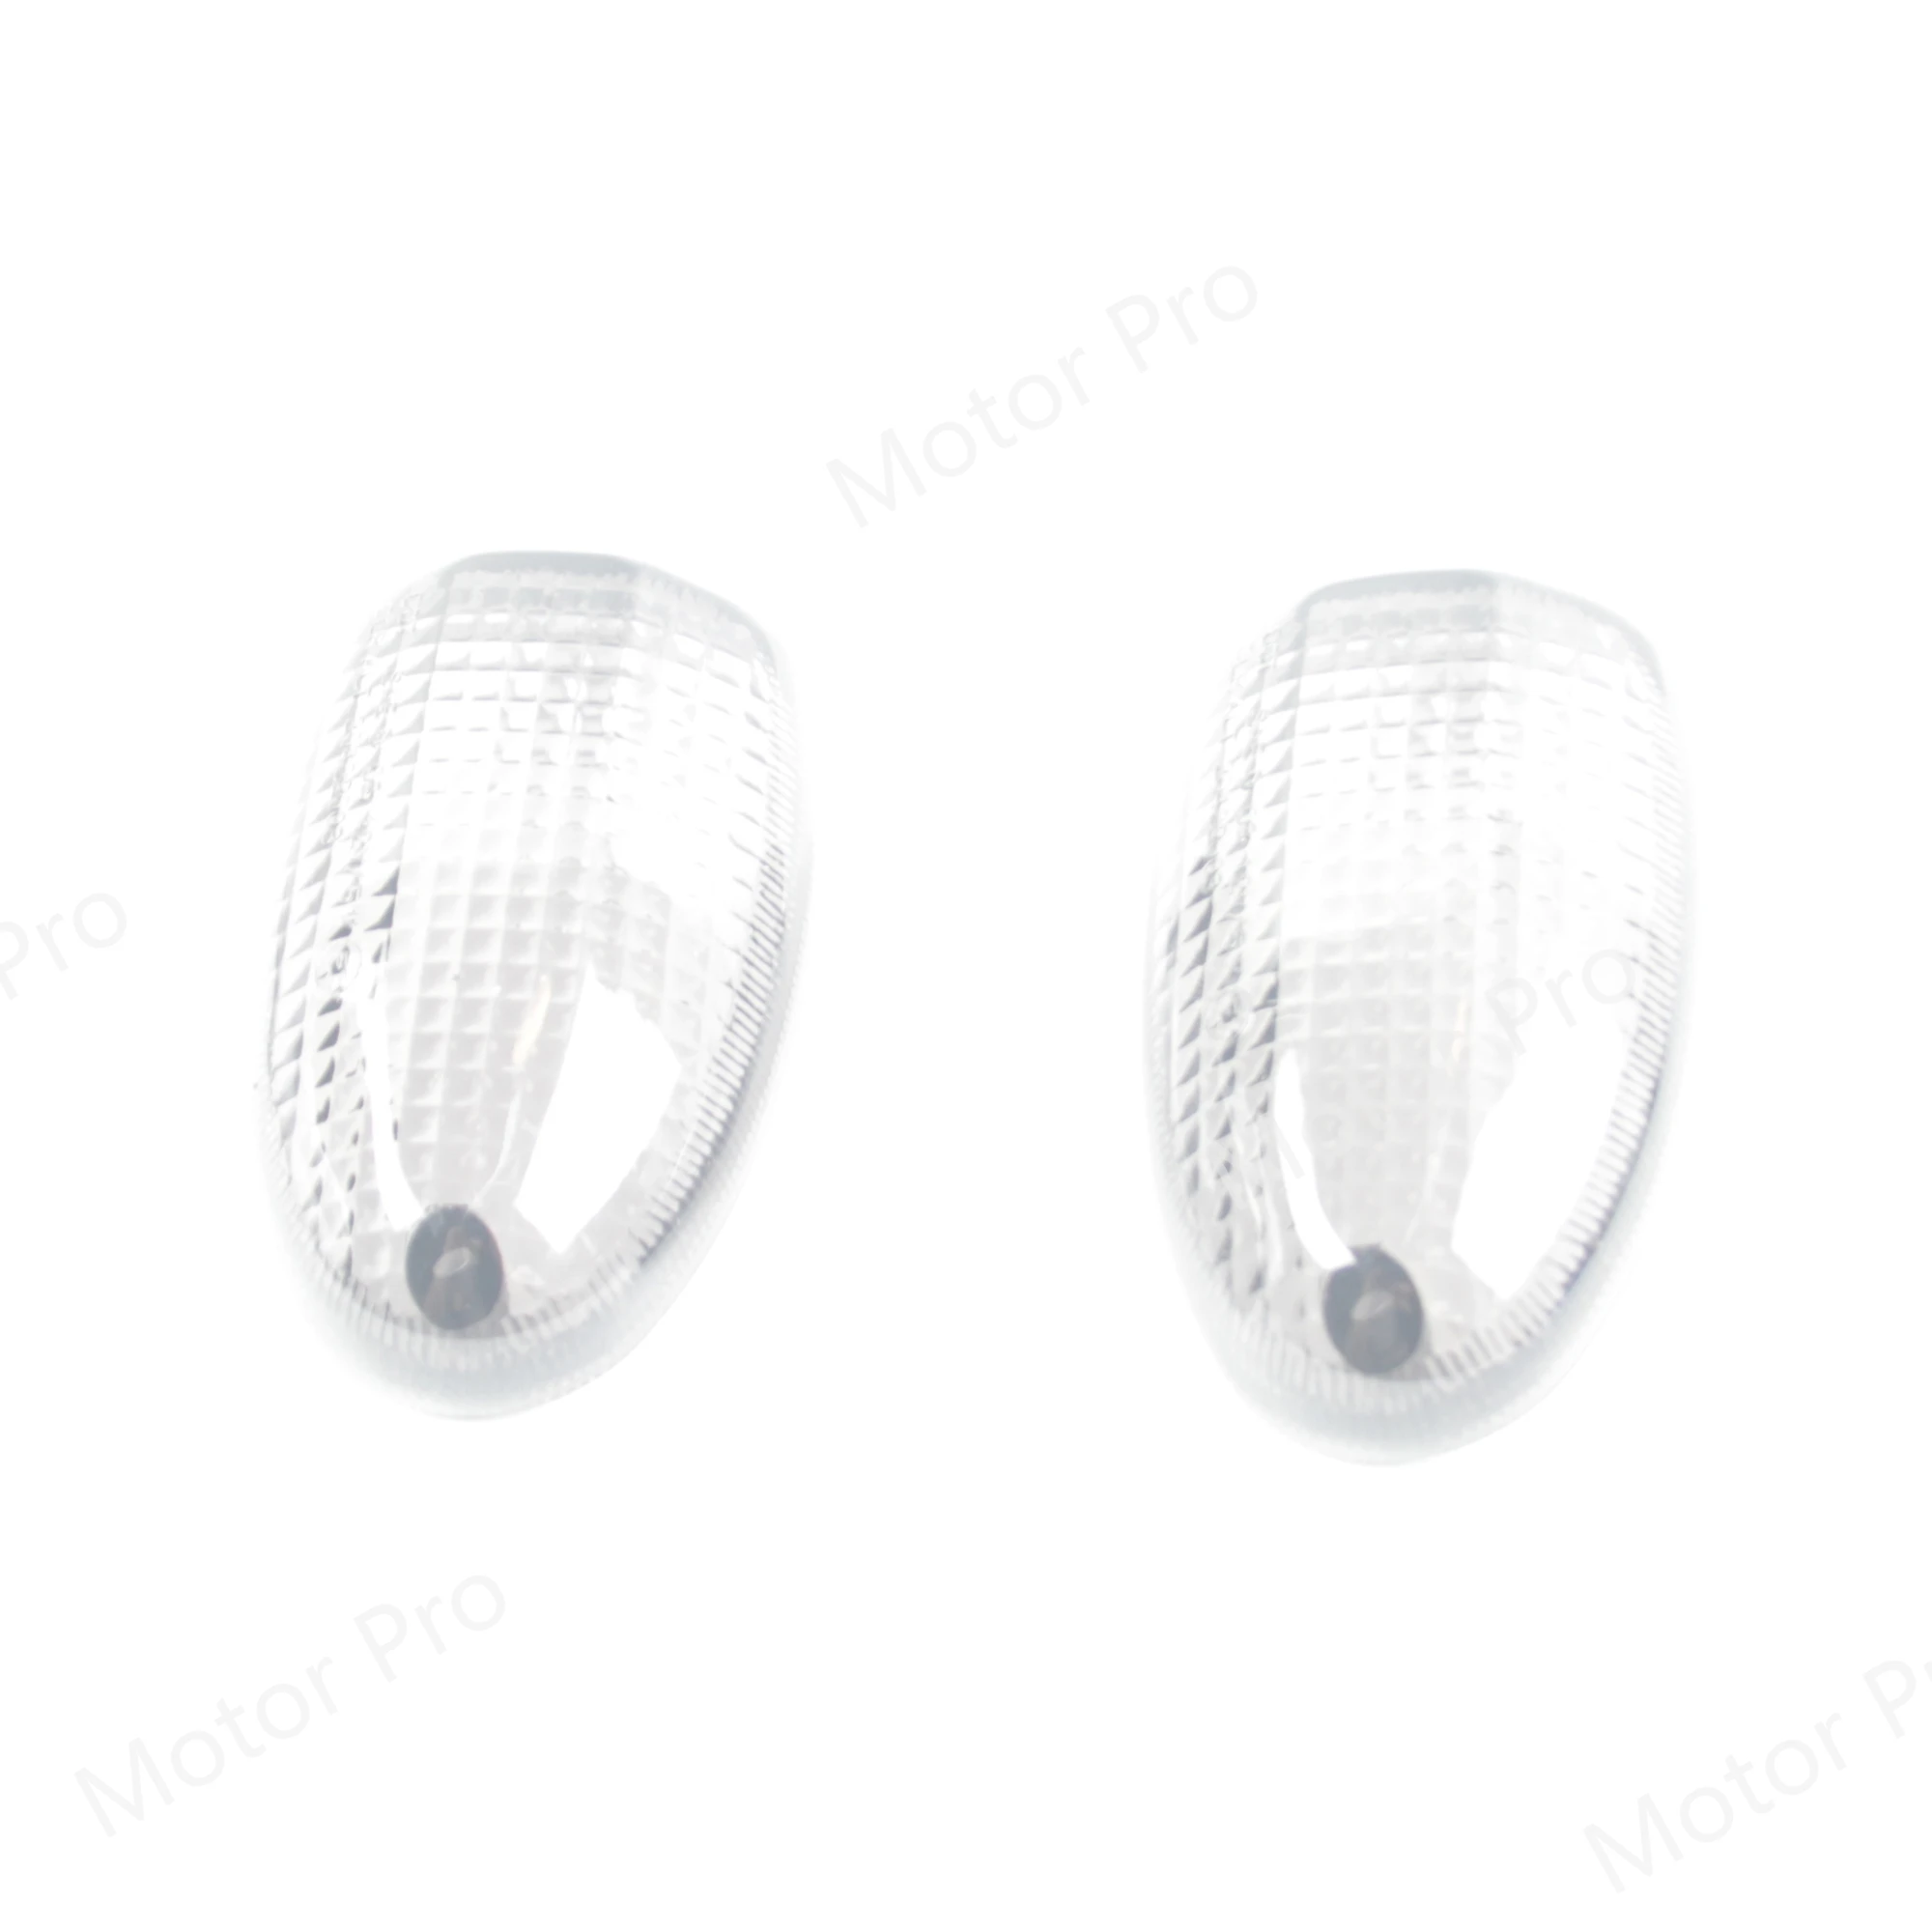 2PCS Light Covers Turn Signal Light Indicator Lens For BMW R1100R R850R R1150GS R1150R Motorcycle Front Lamp R1100 R850 R1150 R images - 6